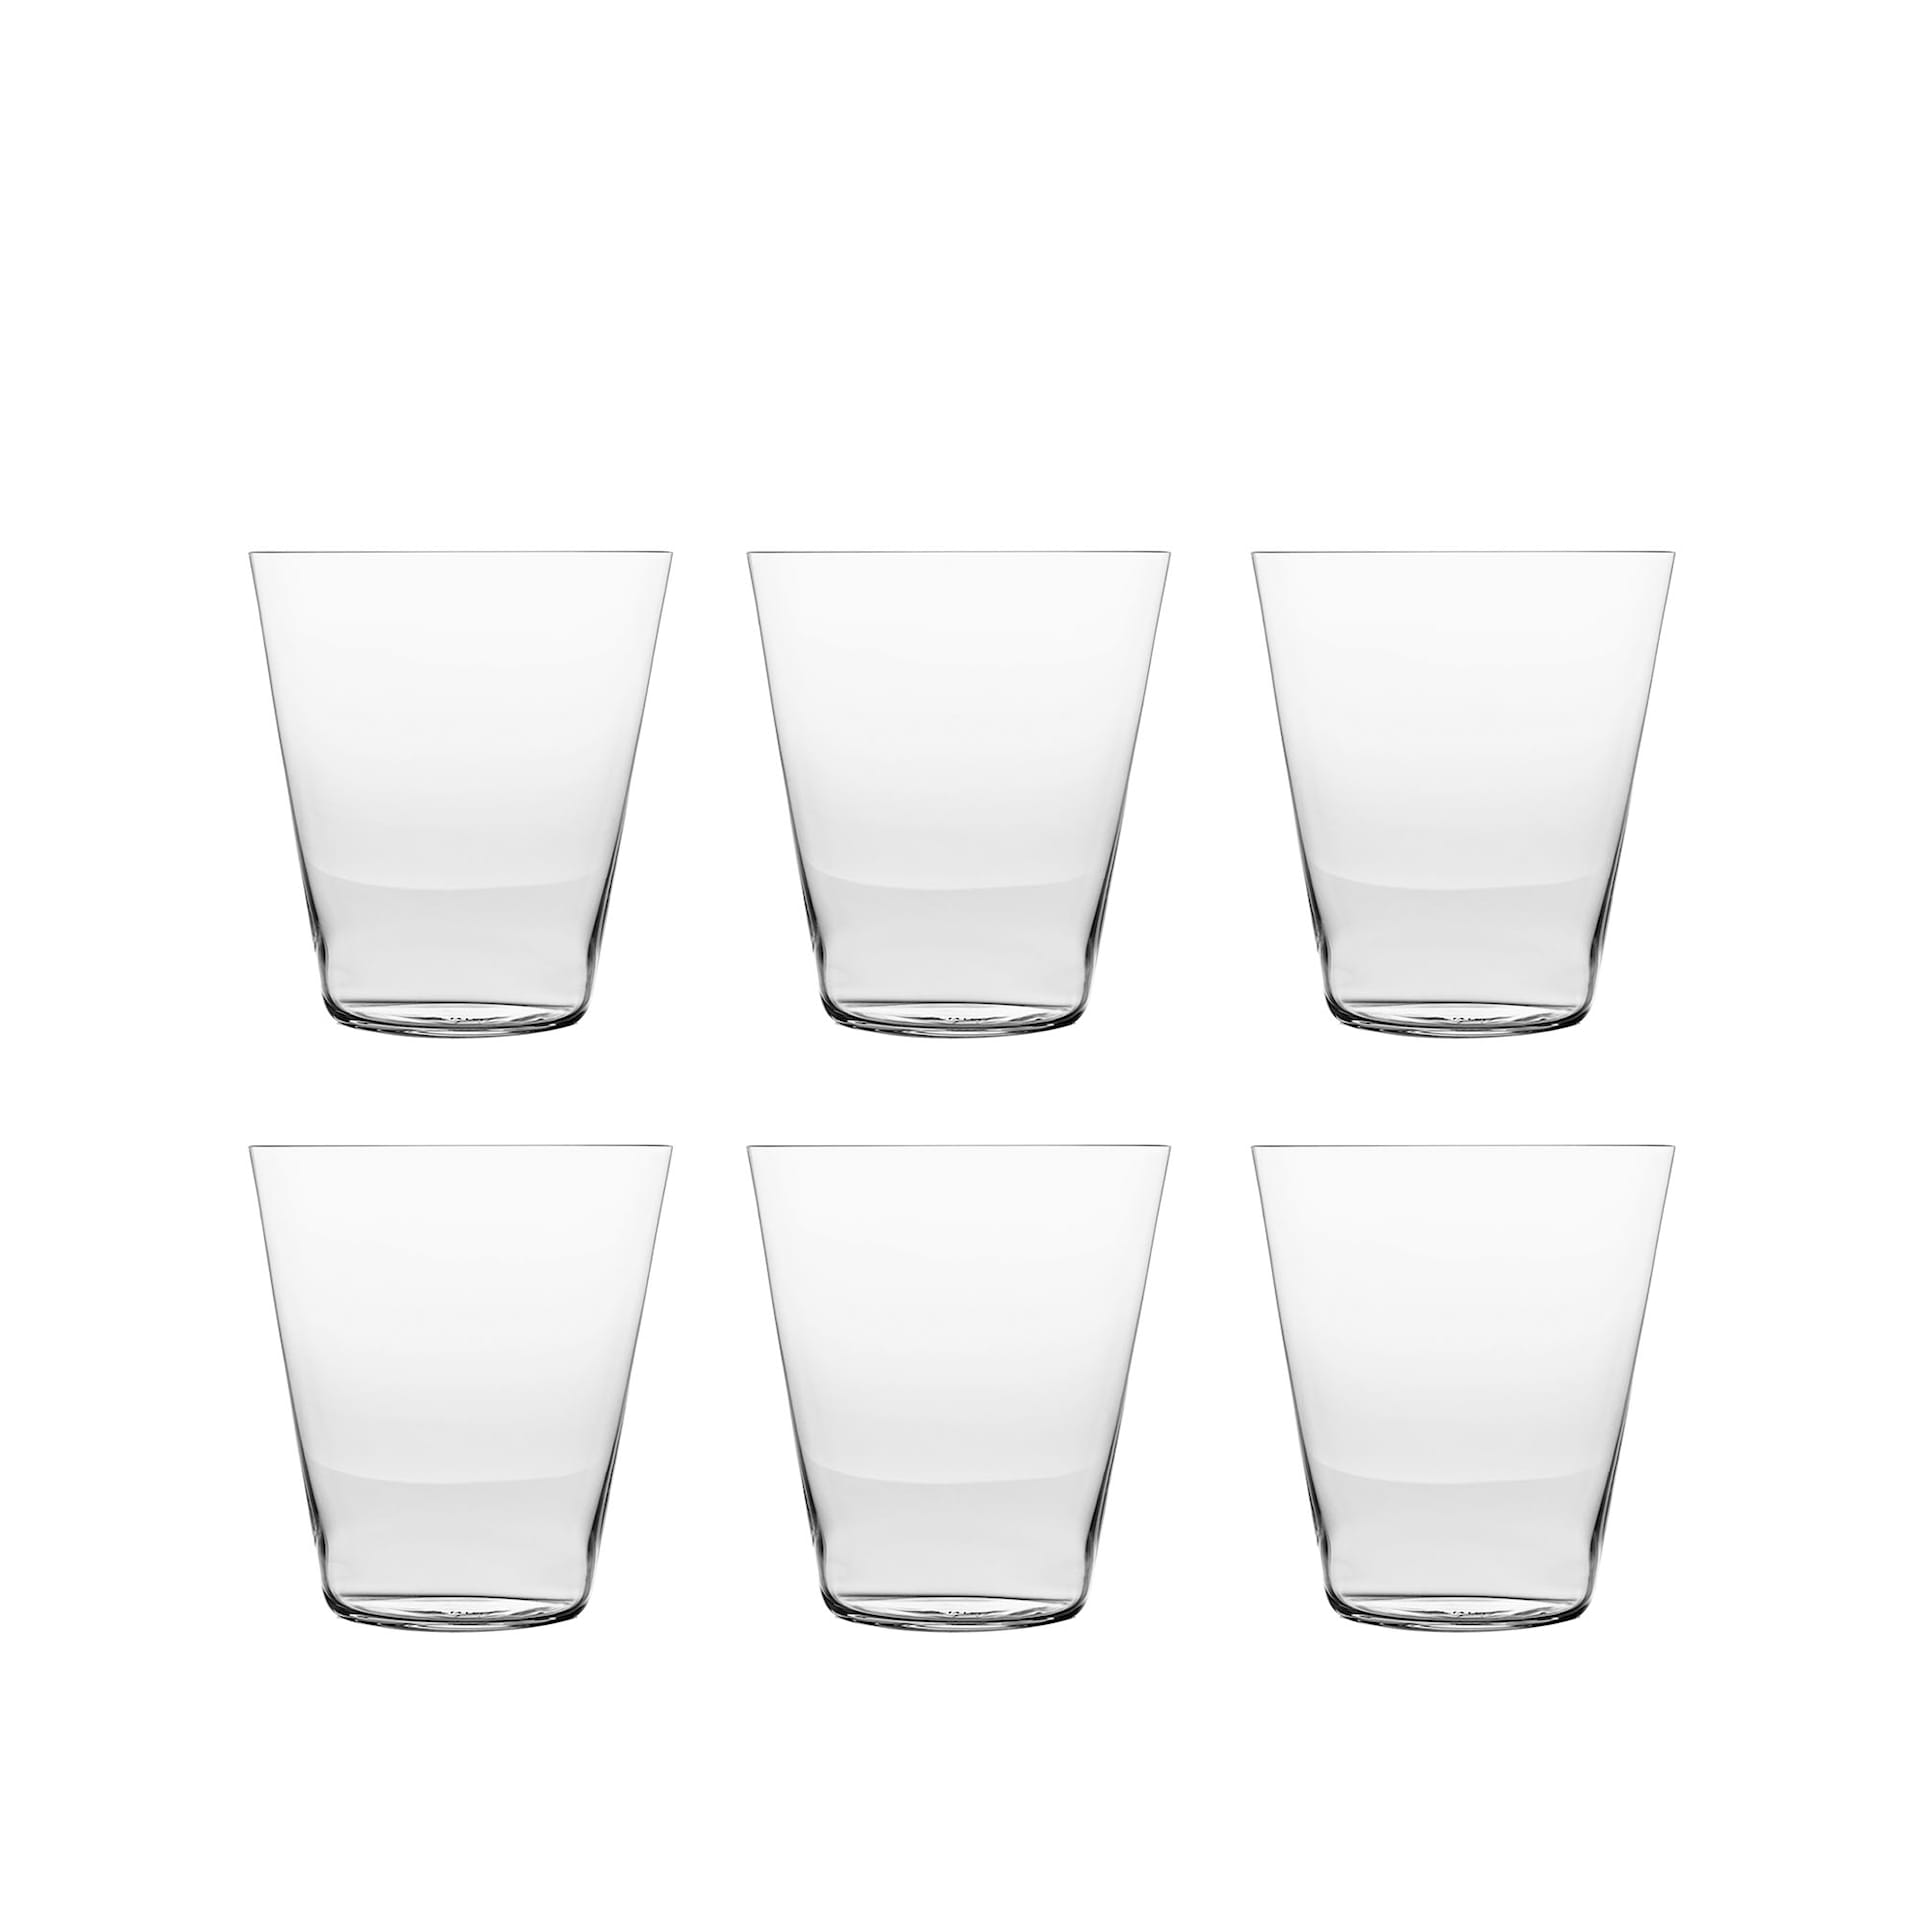 W1 Series Glass W1 Coupe Crystal clear 38 cl 6-Pack - Zalto - NO GA